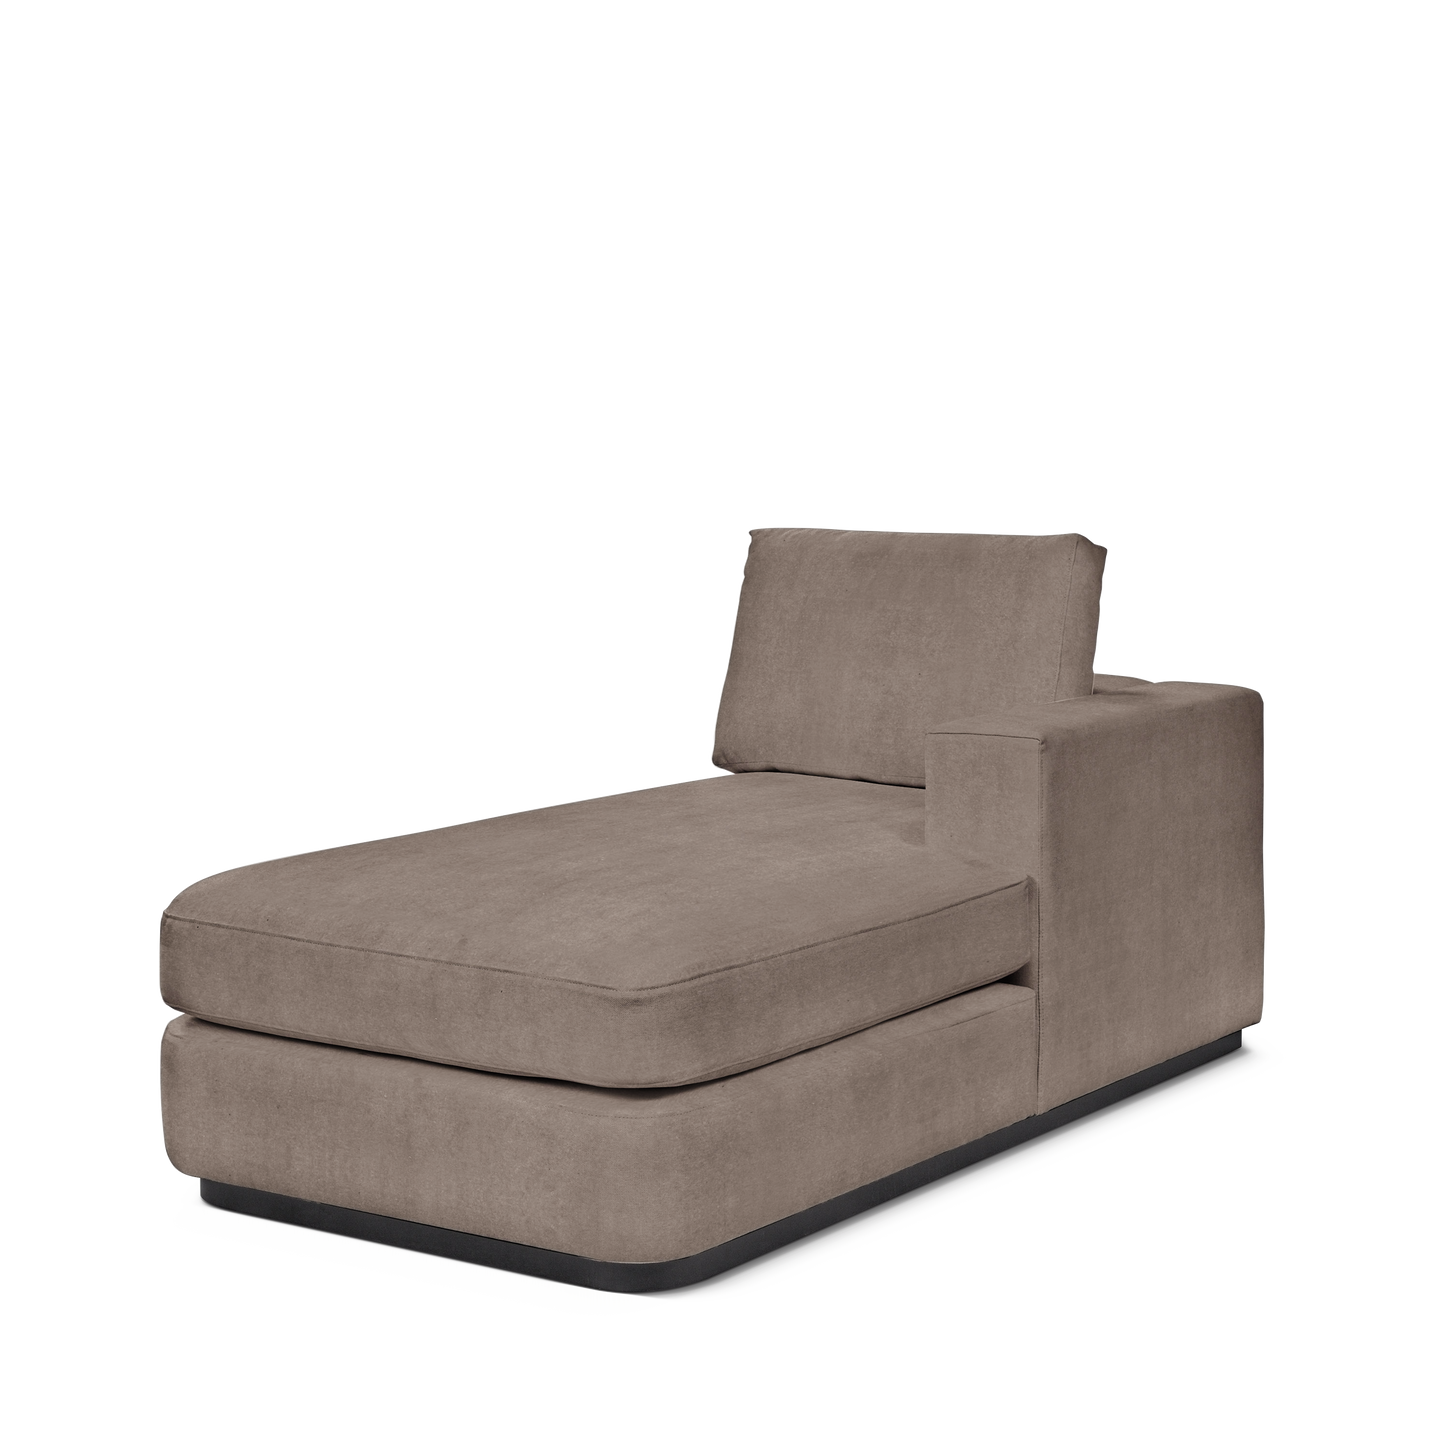 ATLAS 90 Lounge Bed arm rest right with London grey textile